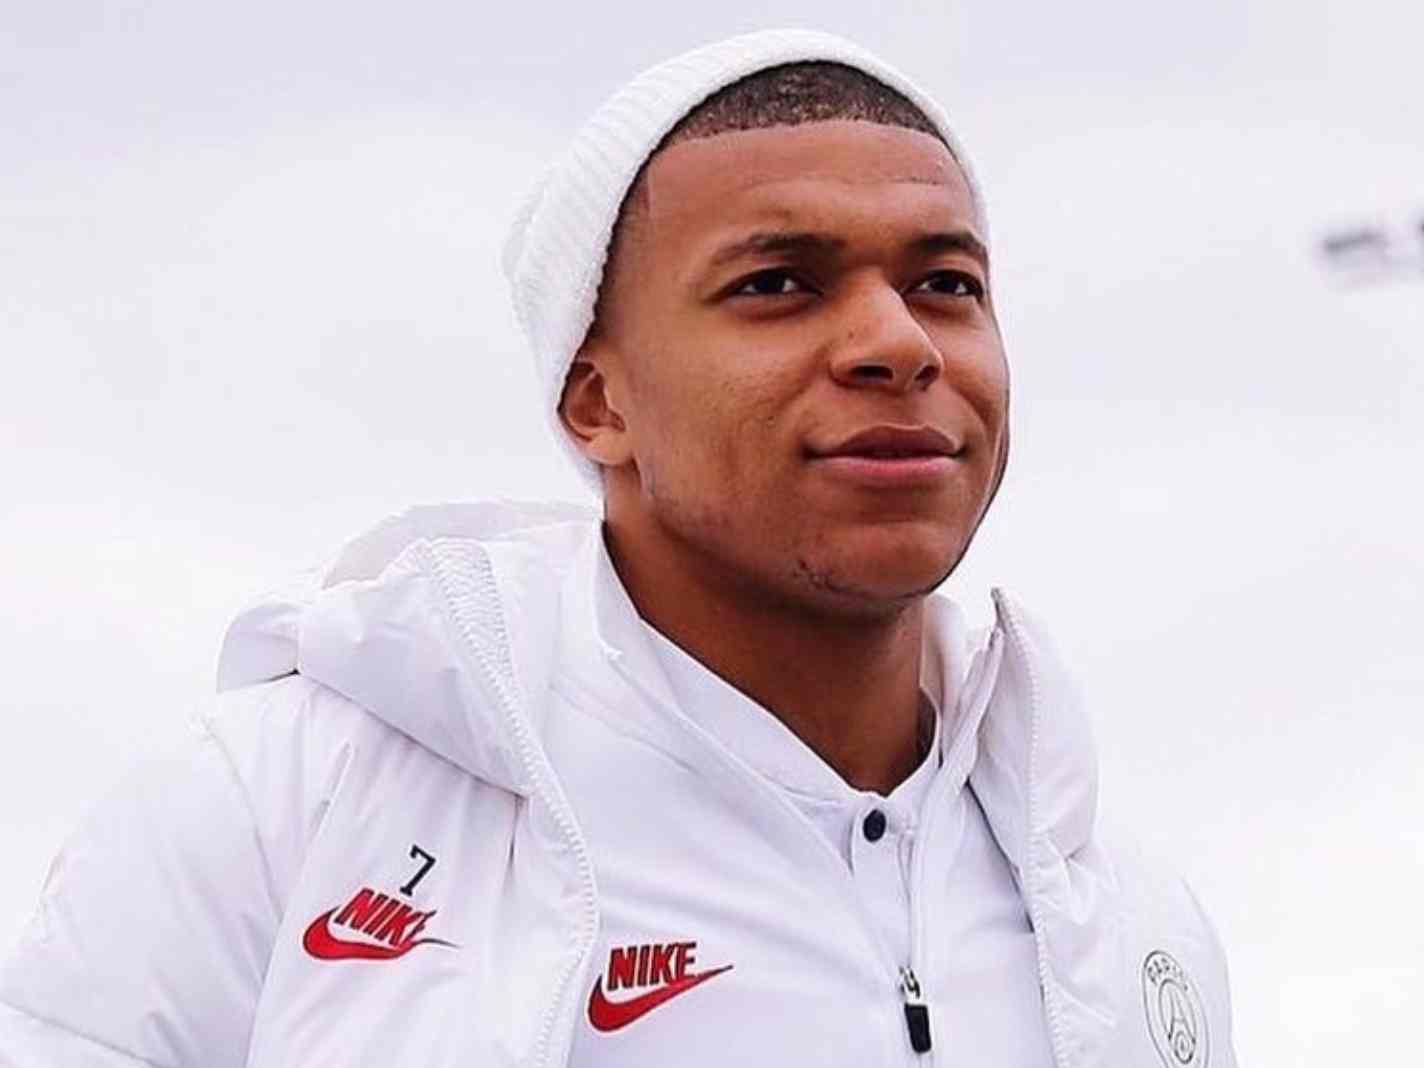 Kylian Mbappe Sponsors: How Much Does The PSG Star Get From Nike?